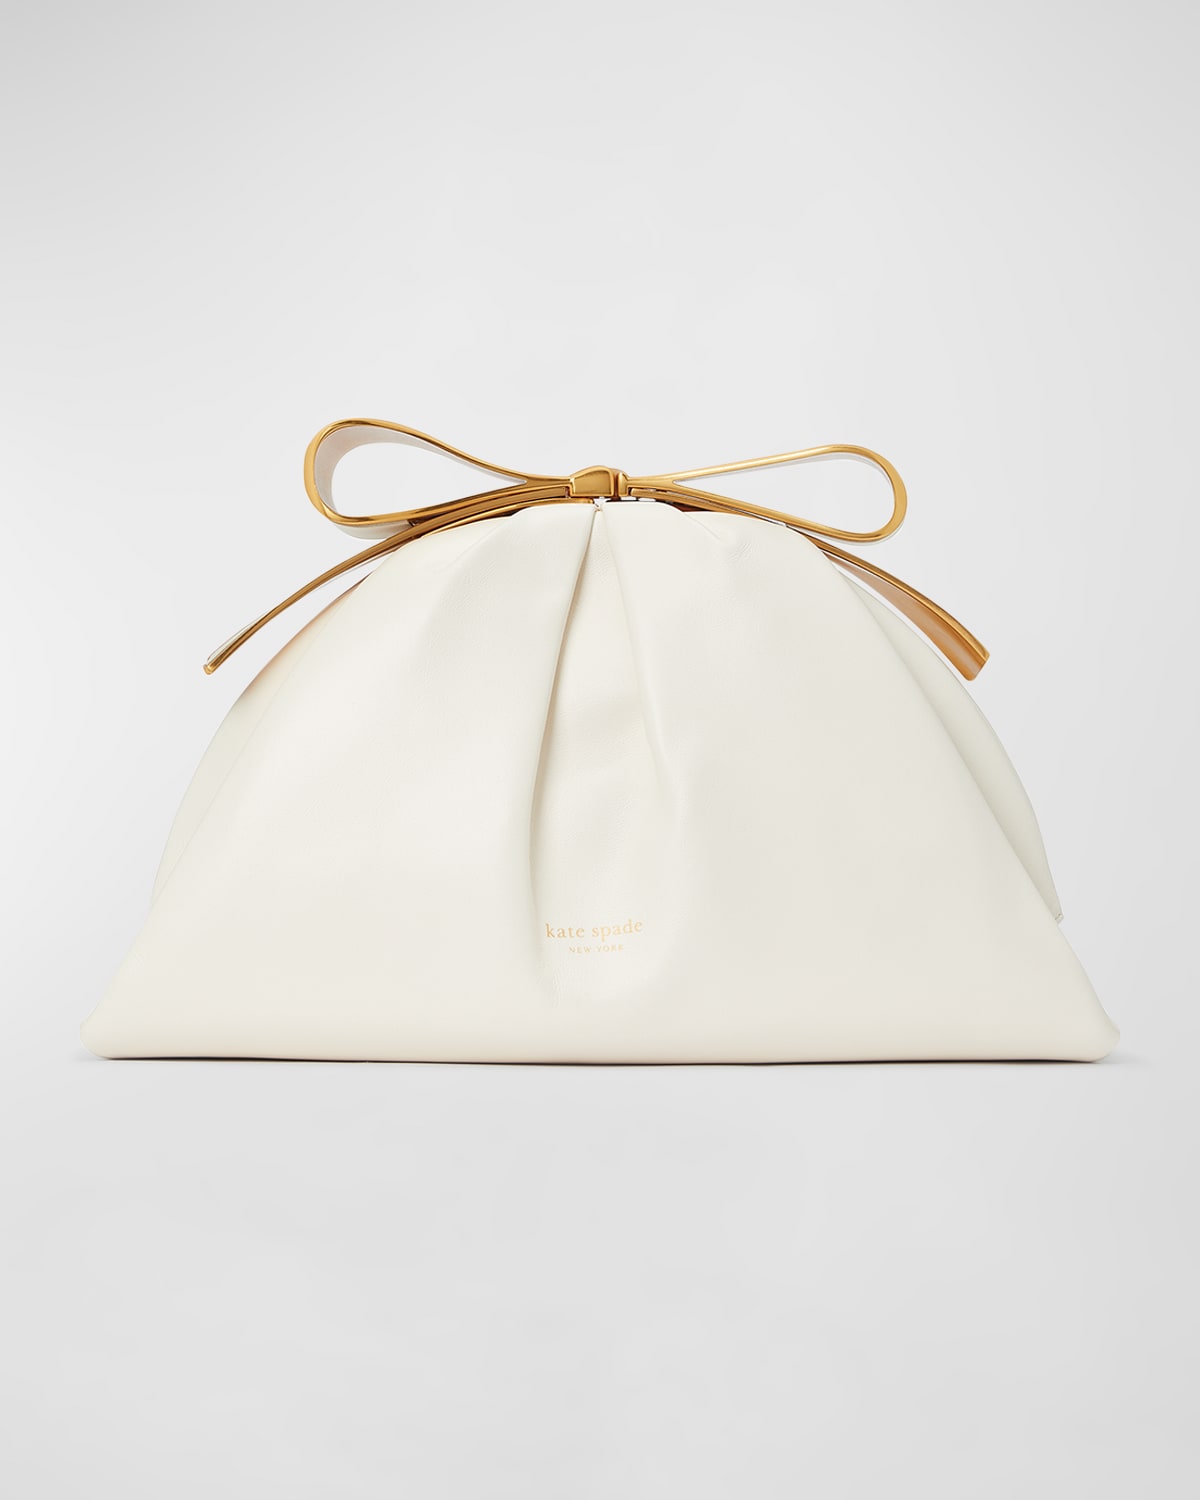 KATE SPADE BRIDAL BOW LEATHER CLUTCH BAG